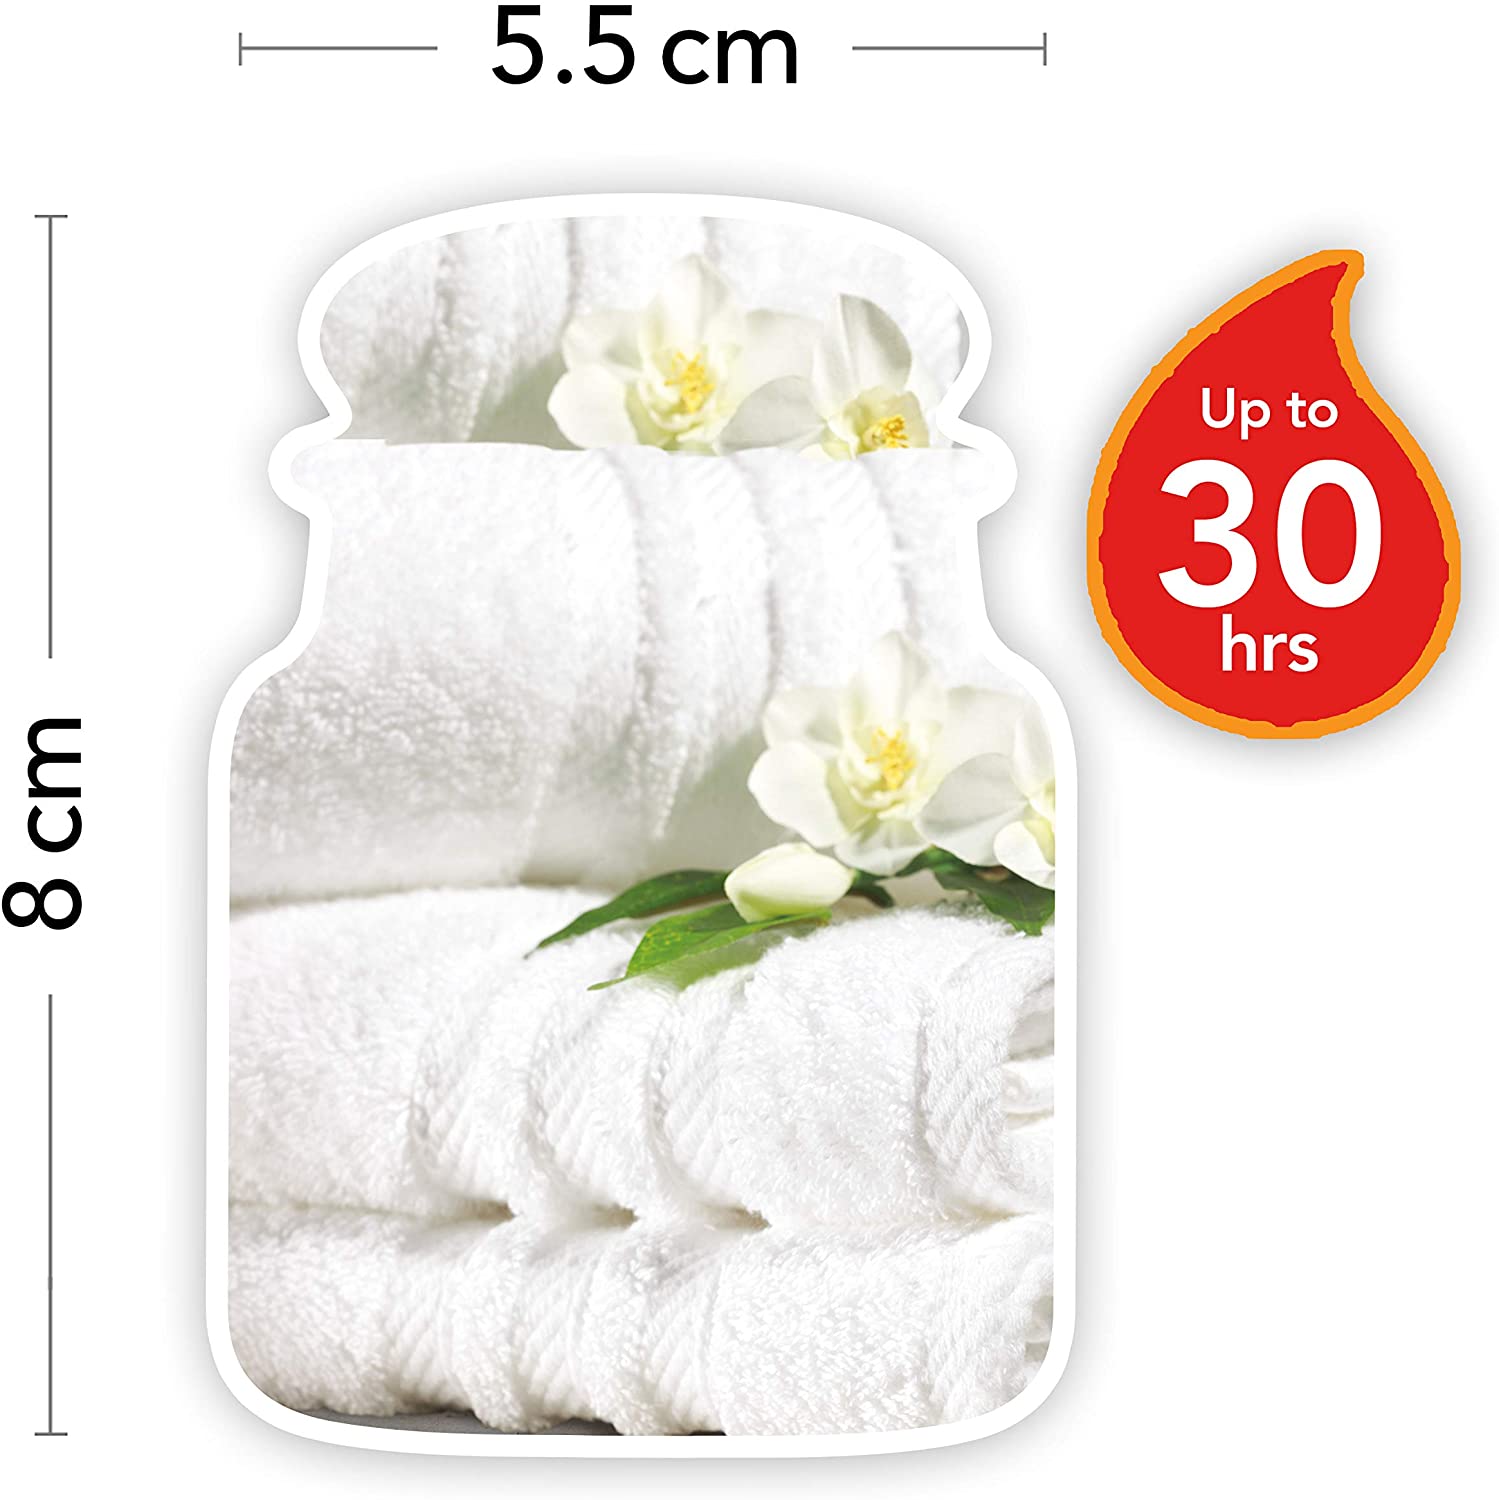 Yankee Candle Medium Jar Candle Fluffy Towels - DNA